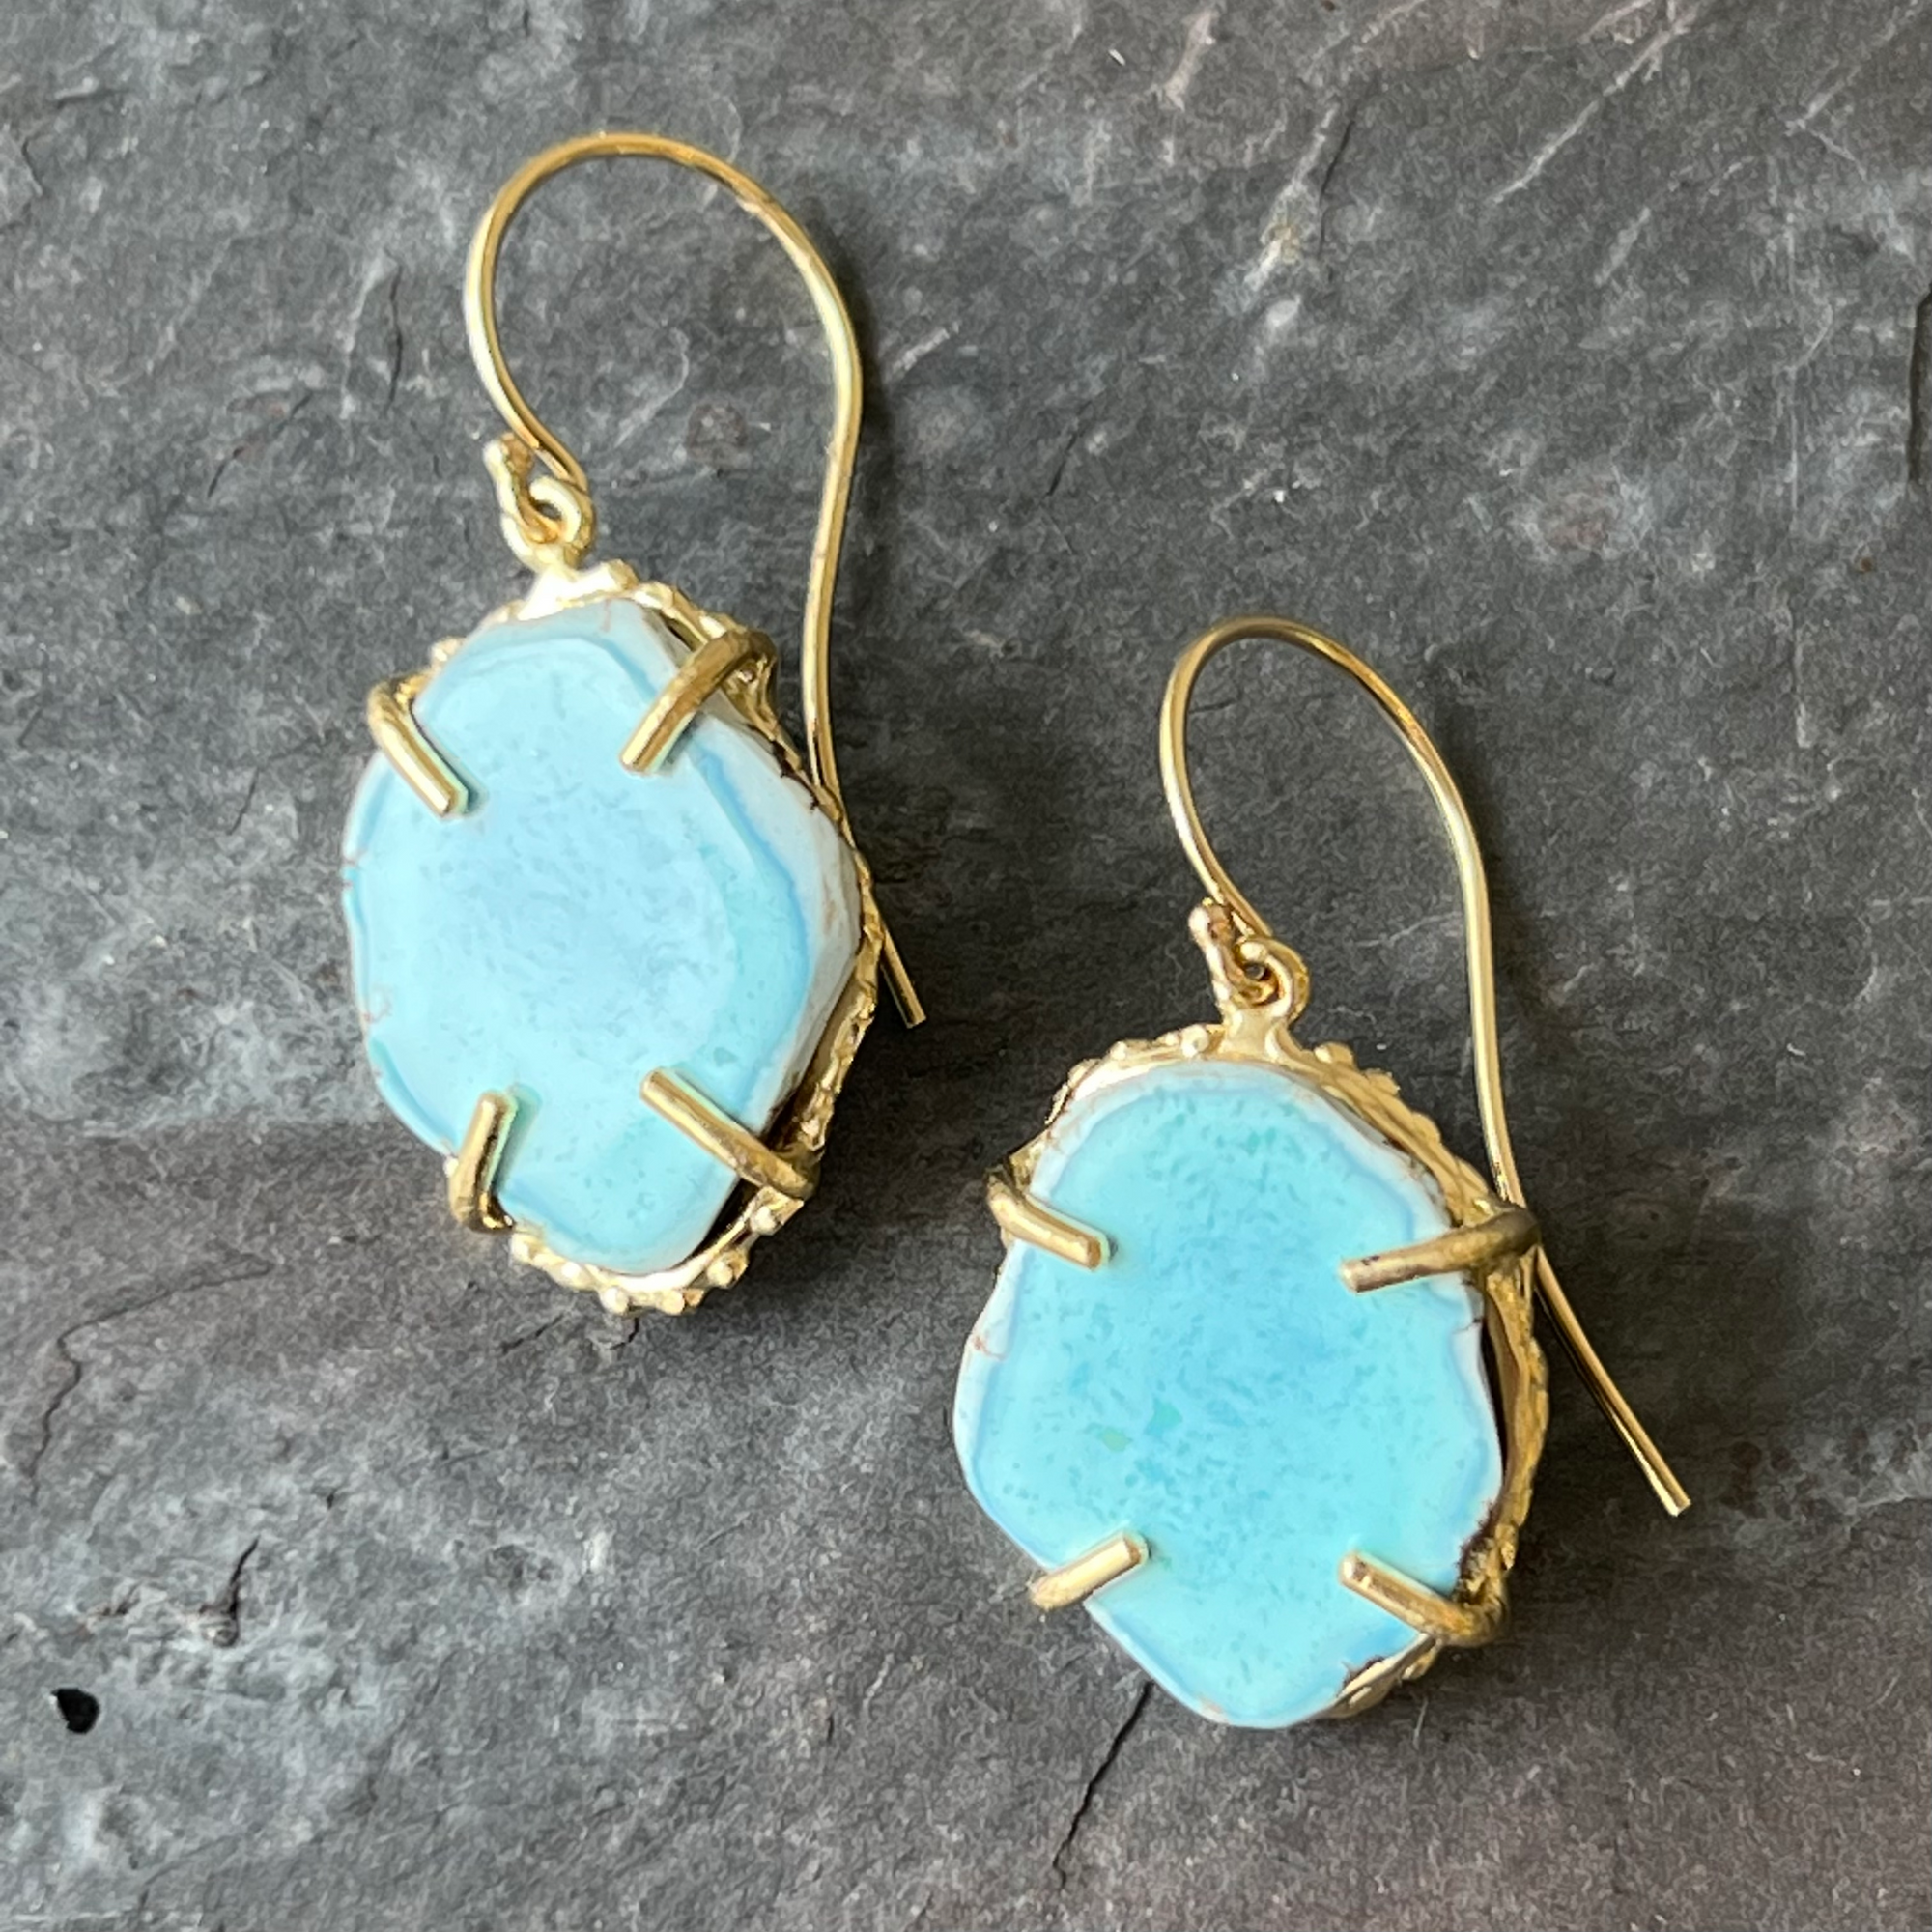 Round Lavender Turquoise 14K Gold Earrings by Jane Bartel